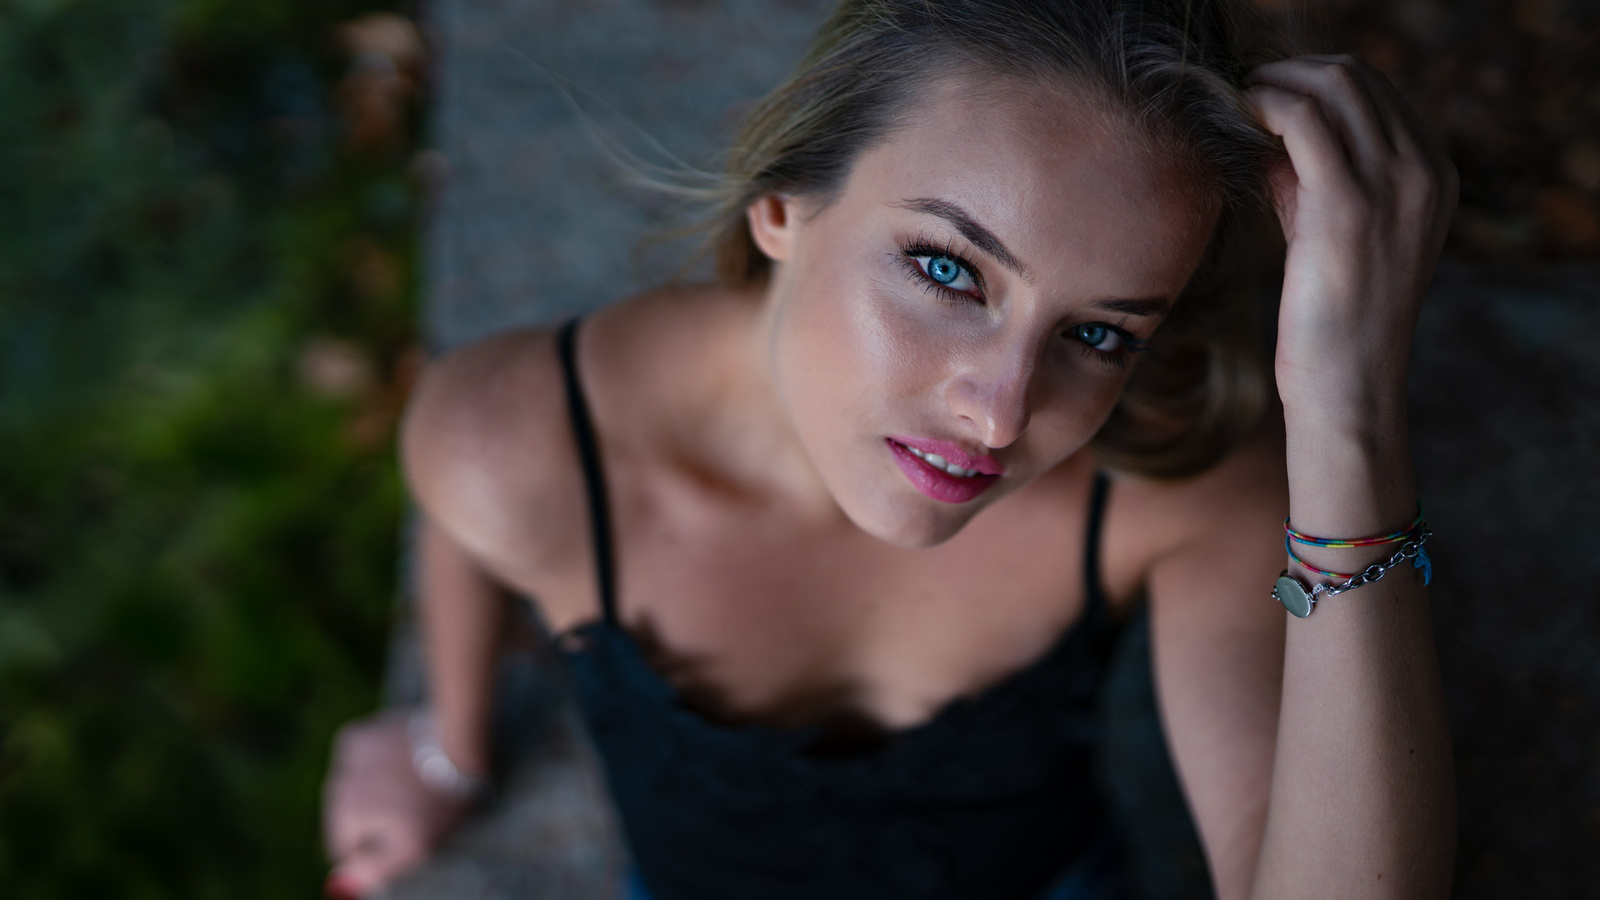 women, marco squassina, portrait, blue eyes, red nails